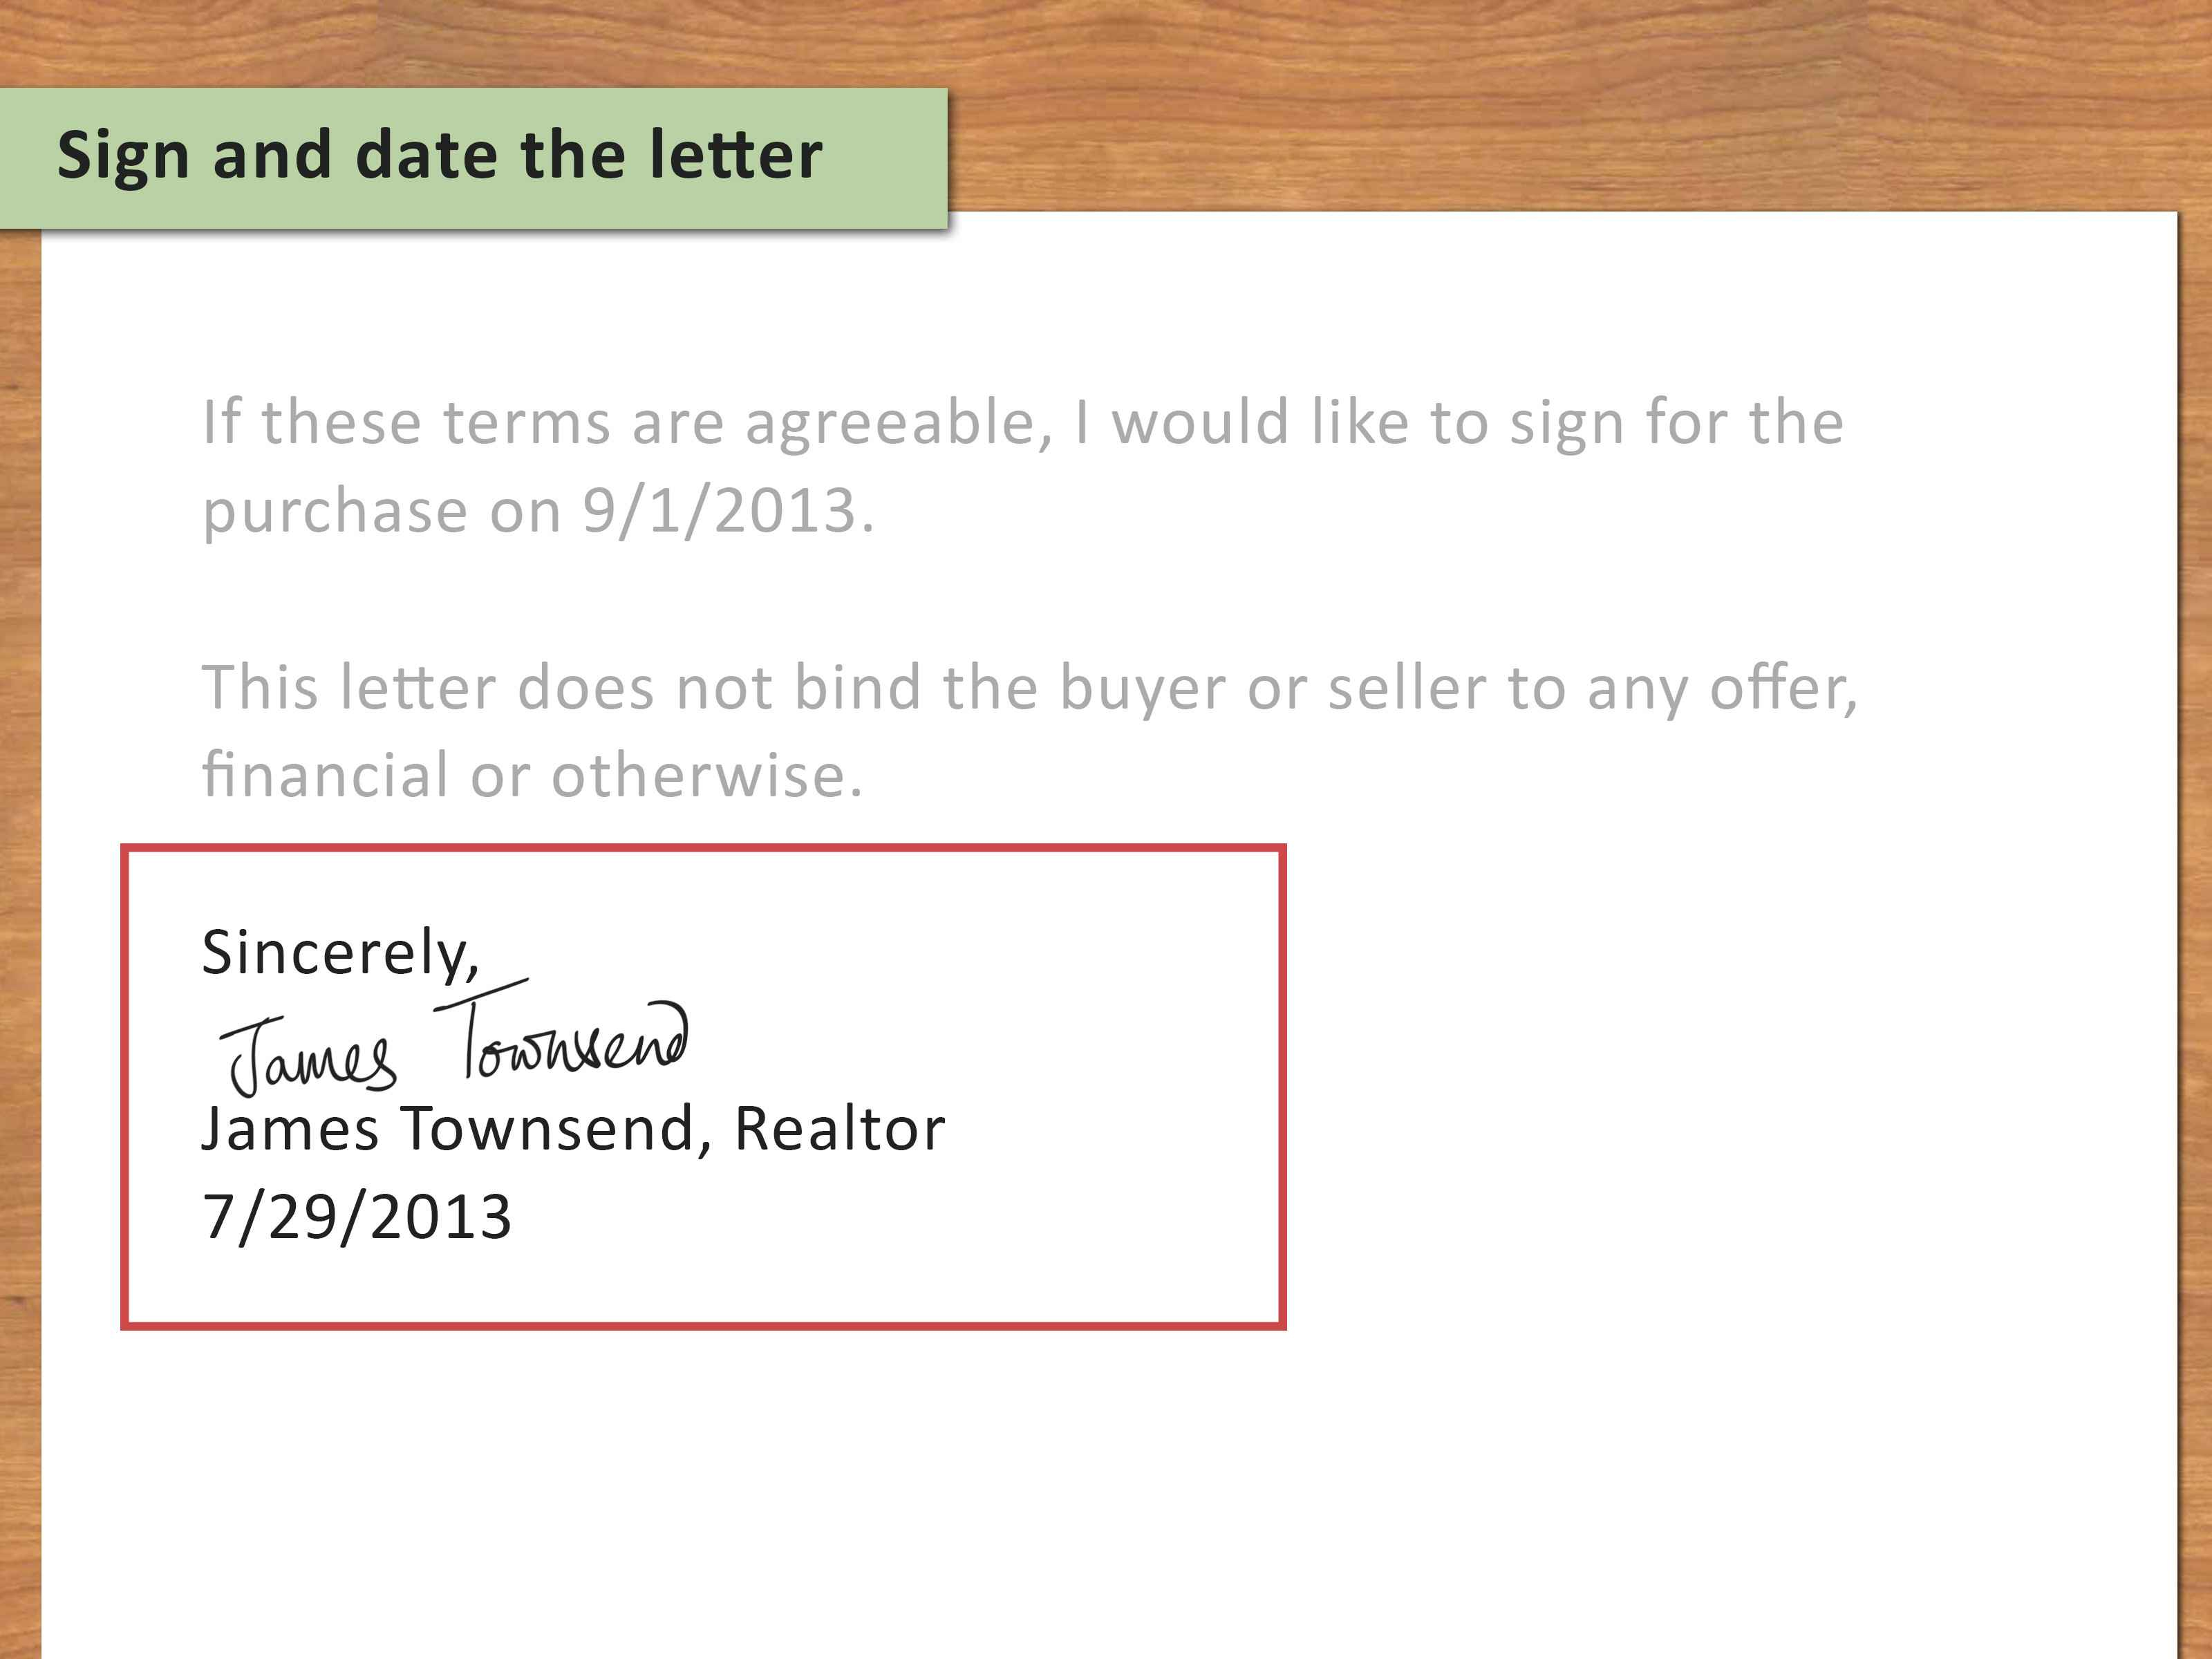 Waiver Letter Template - Sample Release form to Her with Sample Waiver Letter Luxury